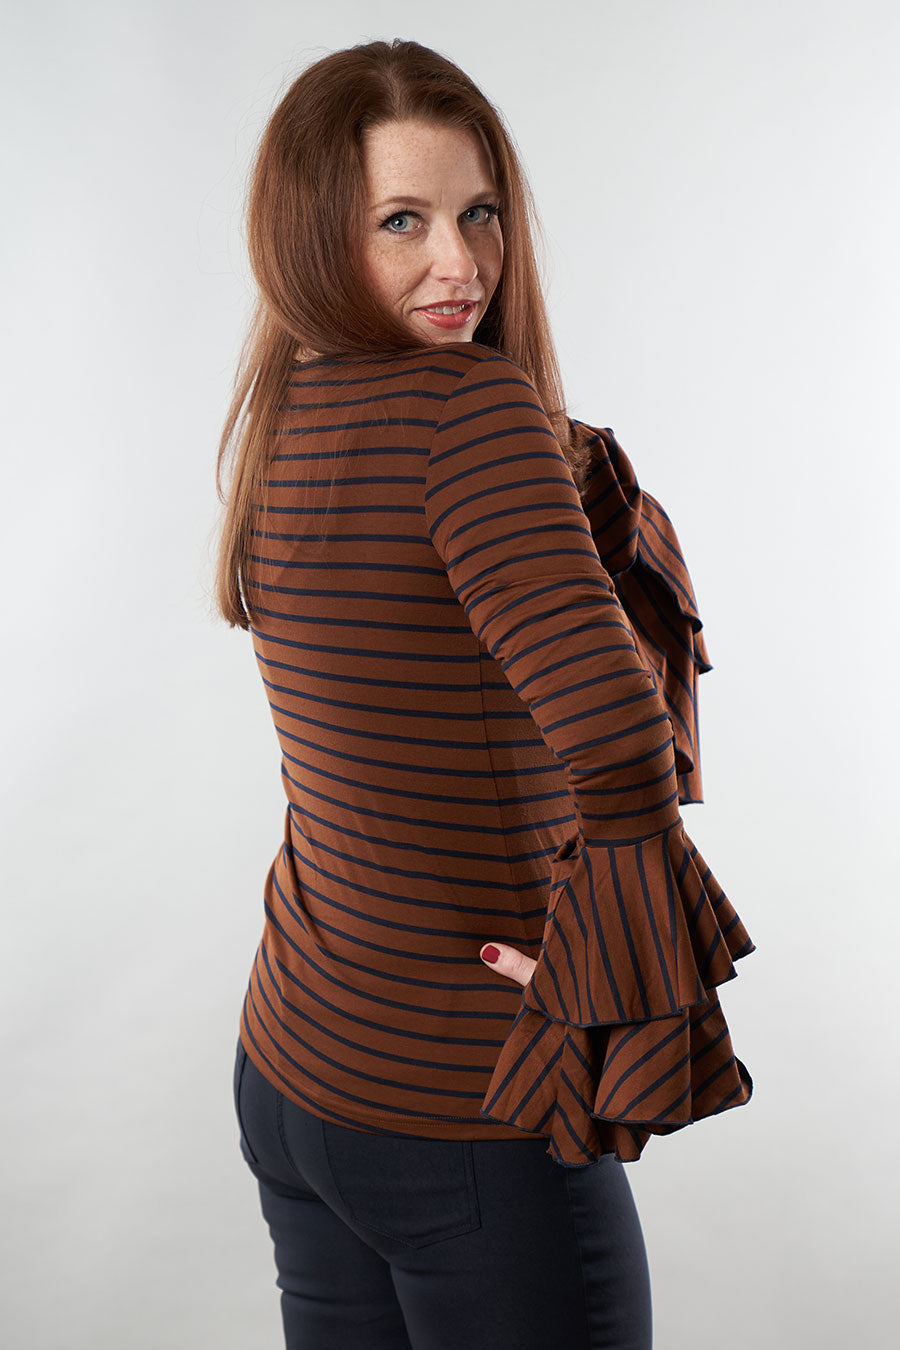 Influential Striped Top Side